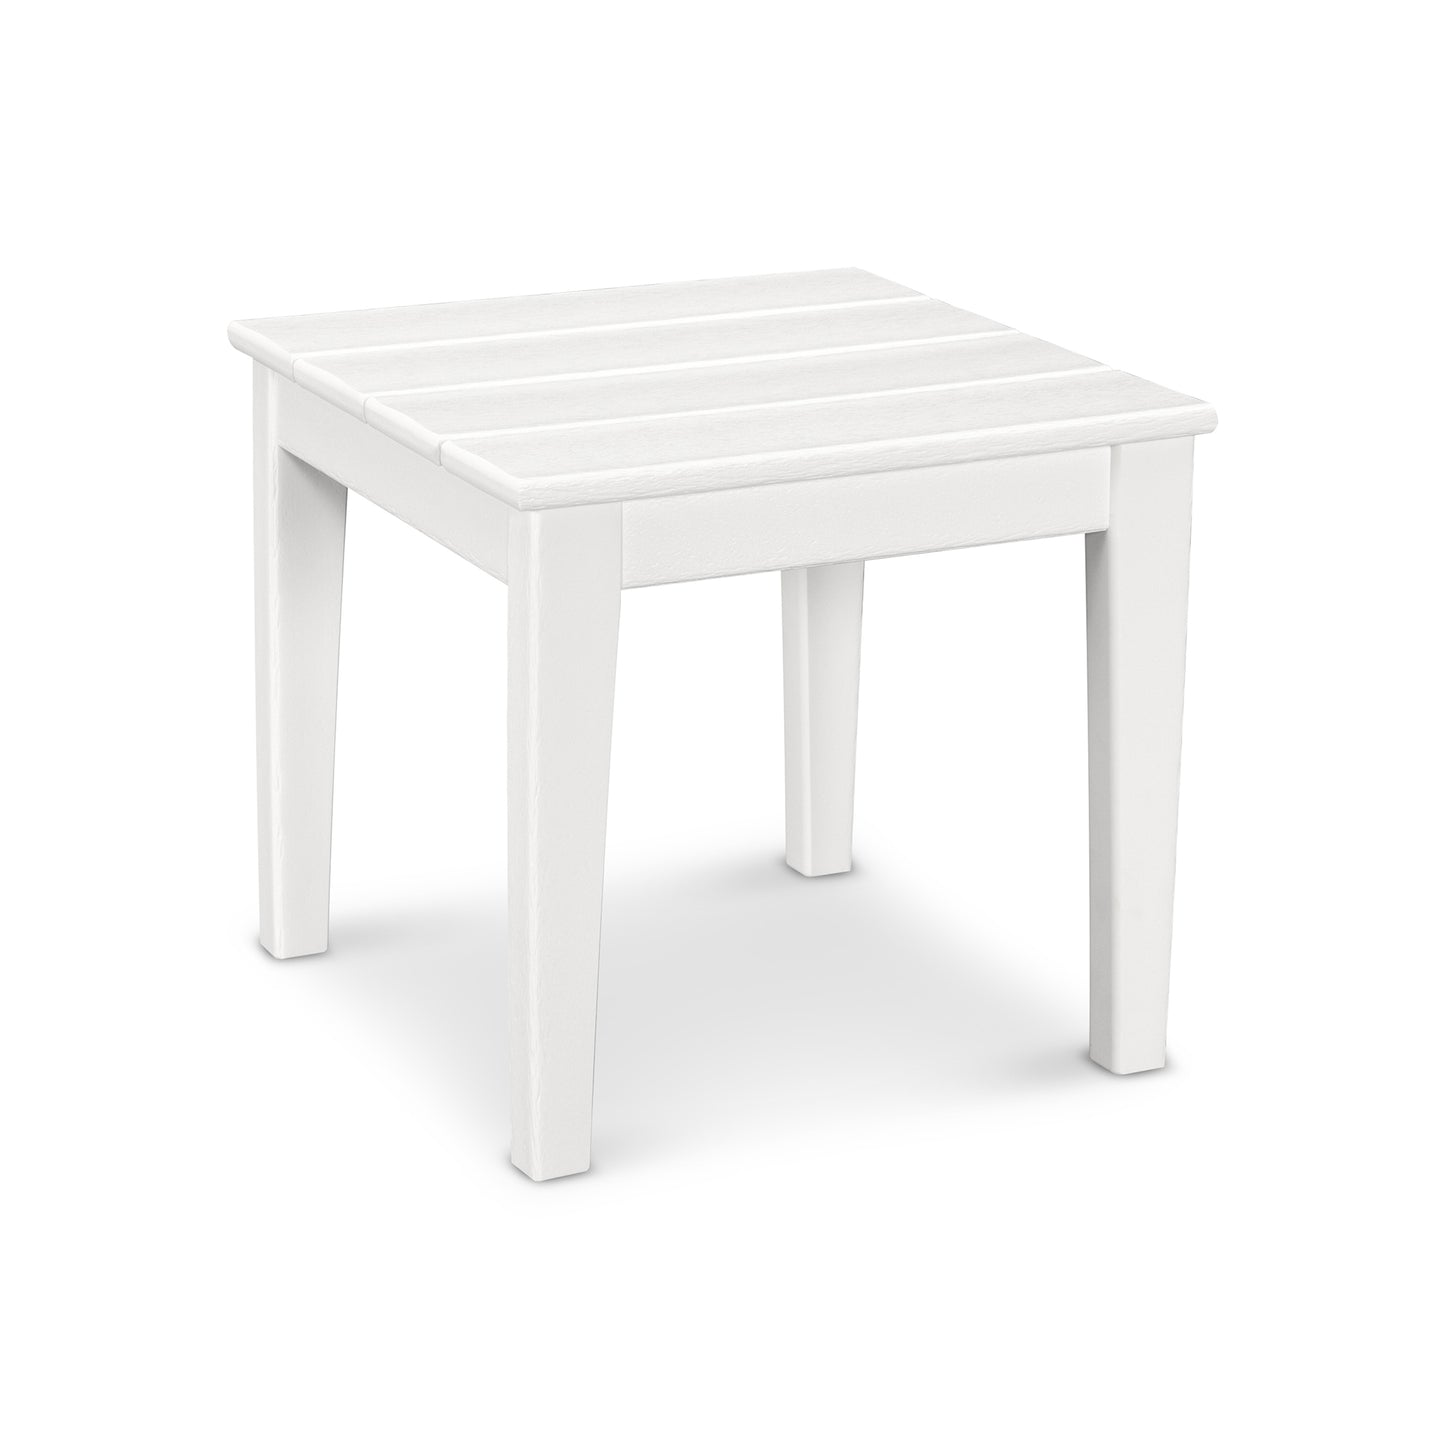 A simple white square POLYWOOD® Newport 18" End Table with a slatted top and four legs, isolated on a white background.